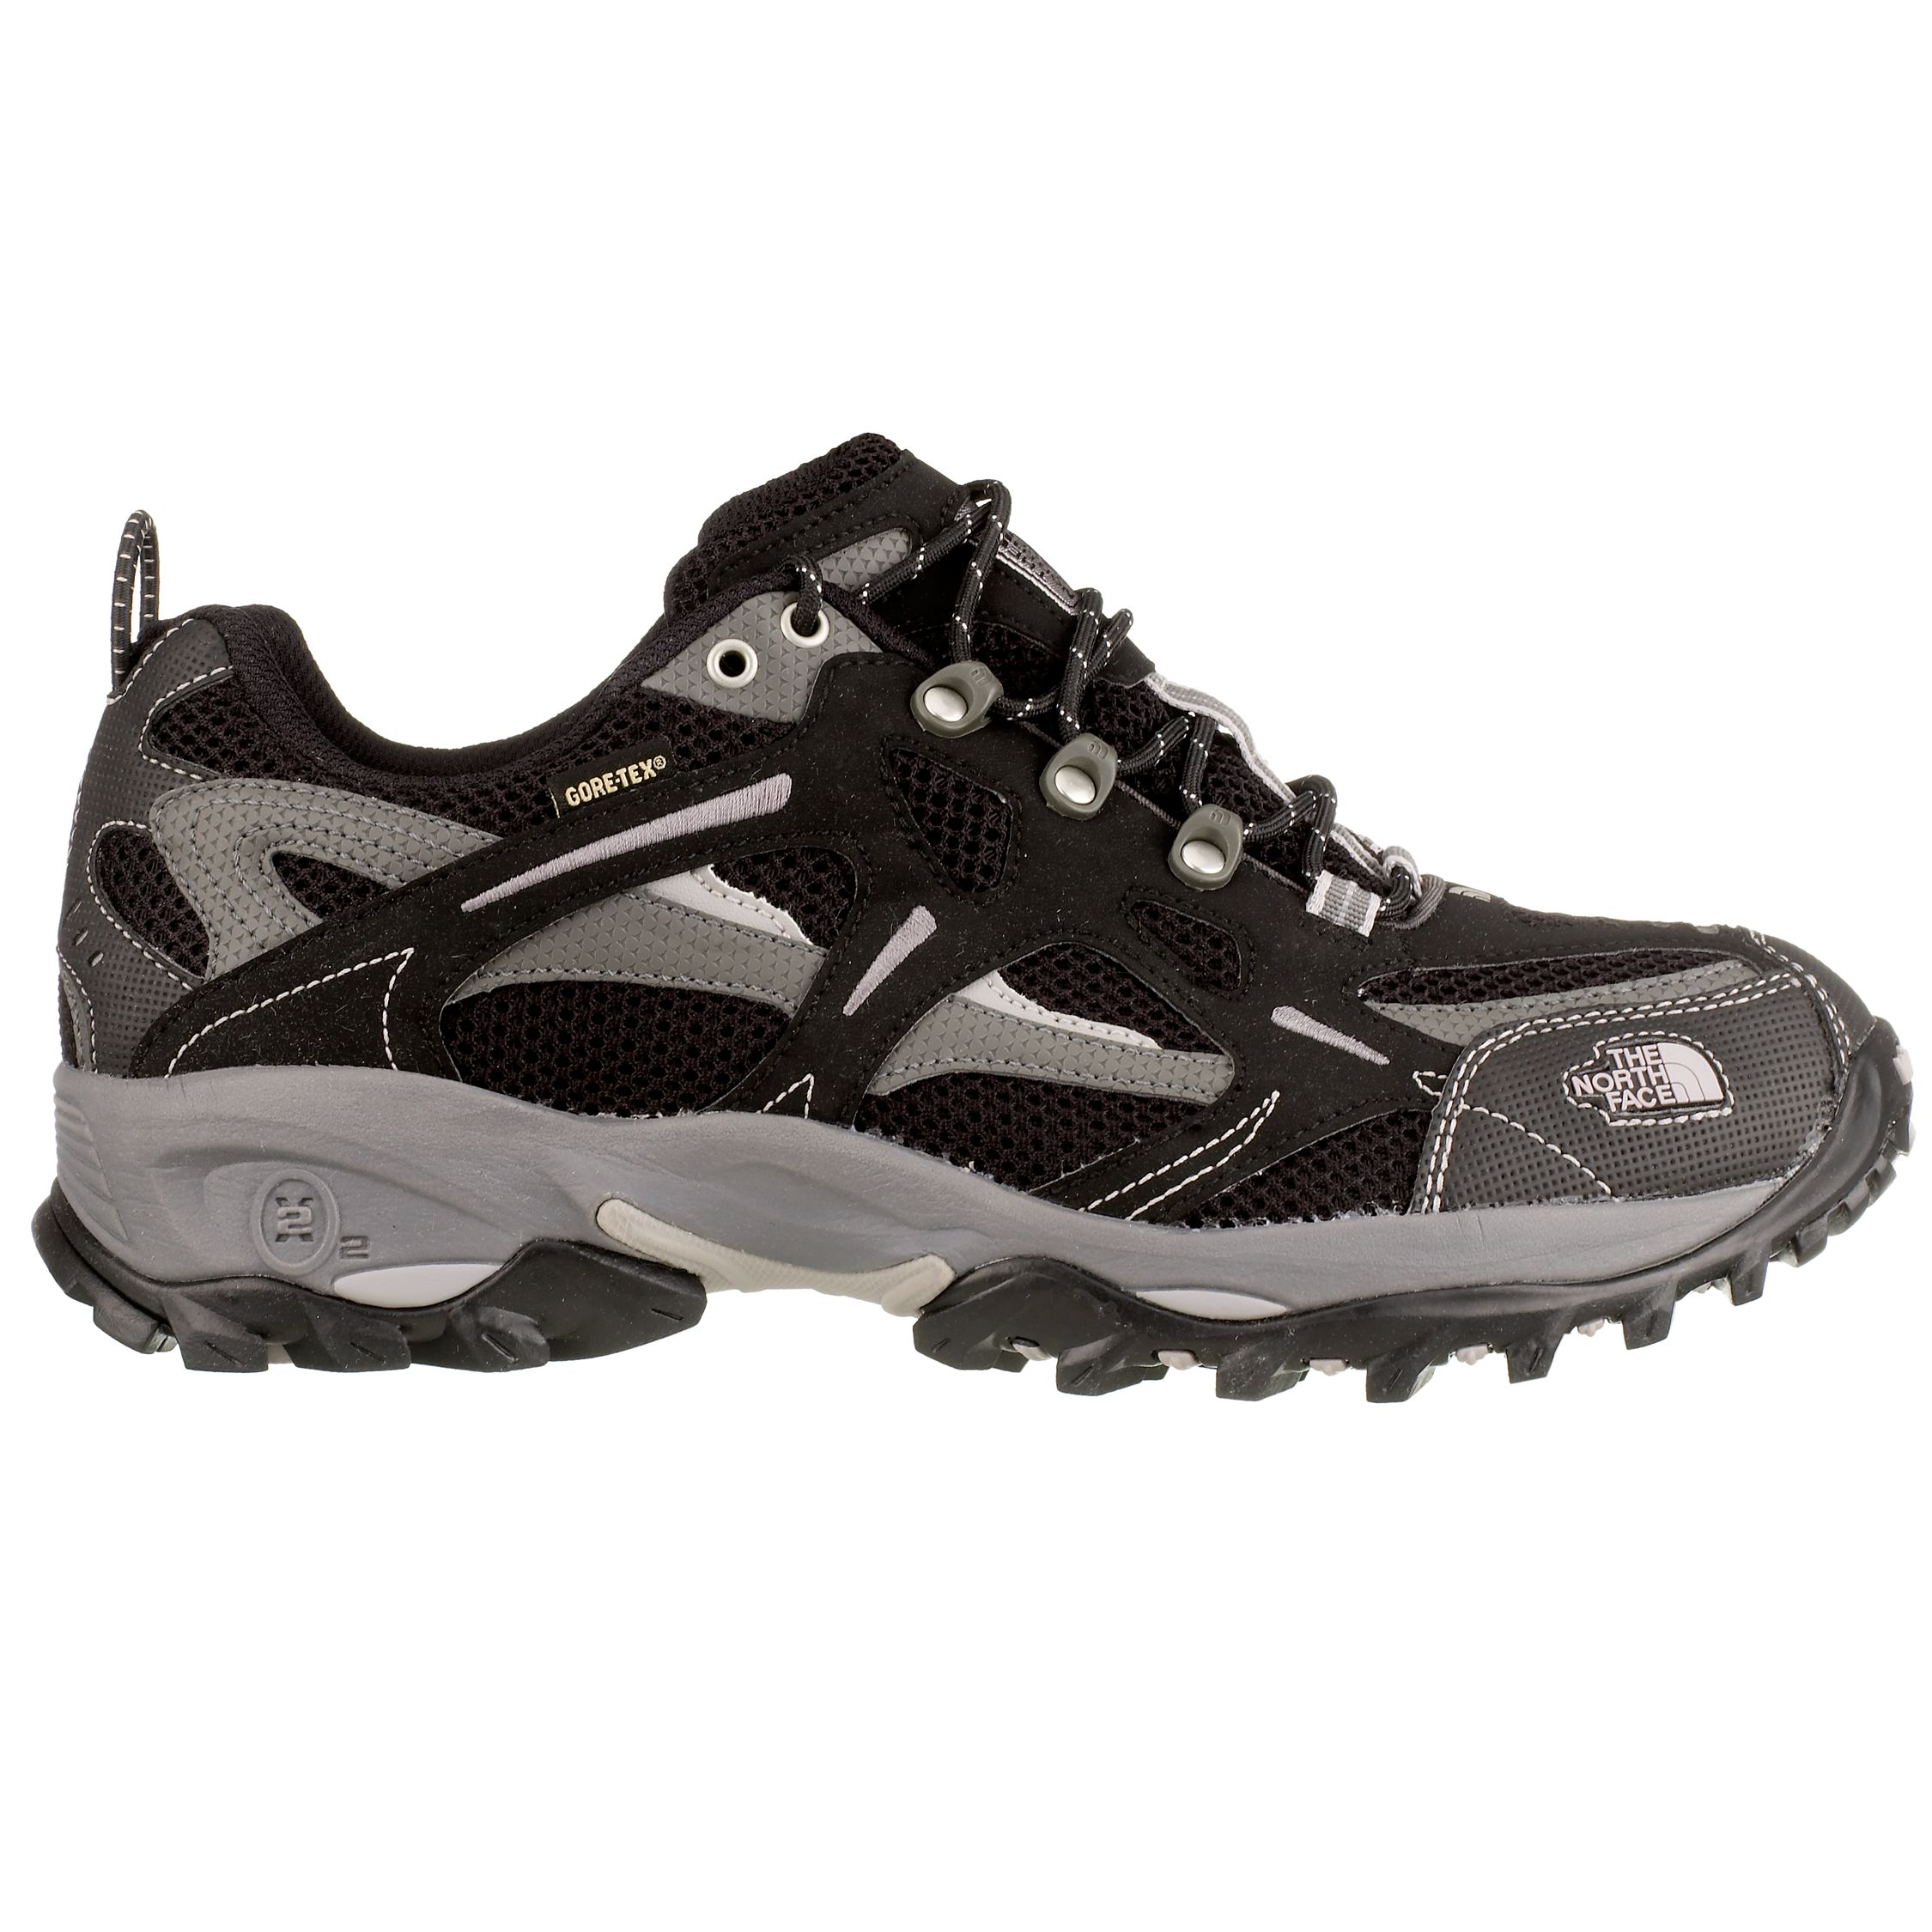 The North Face Hedgehog XCR Shoes, Black, Size 11